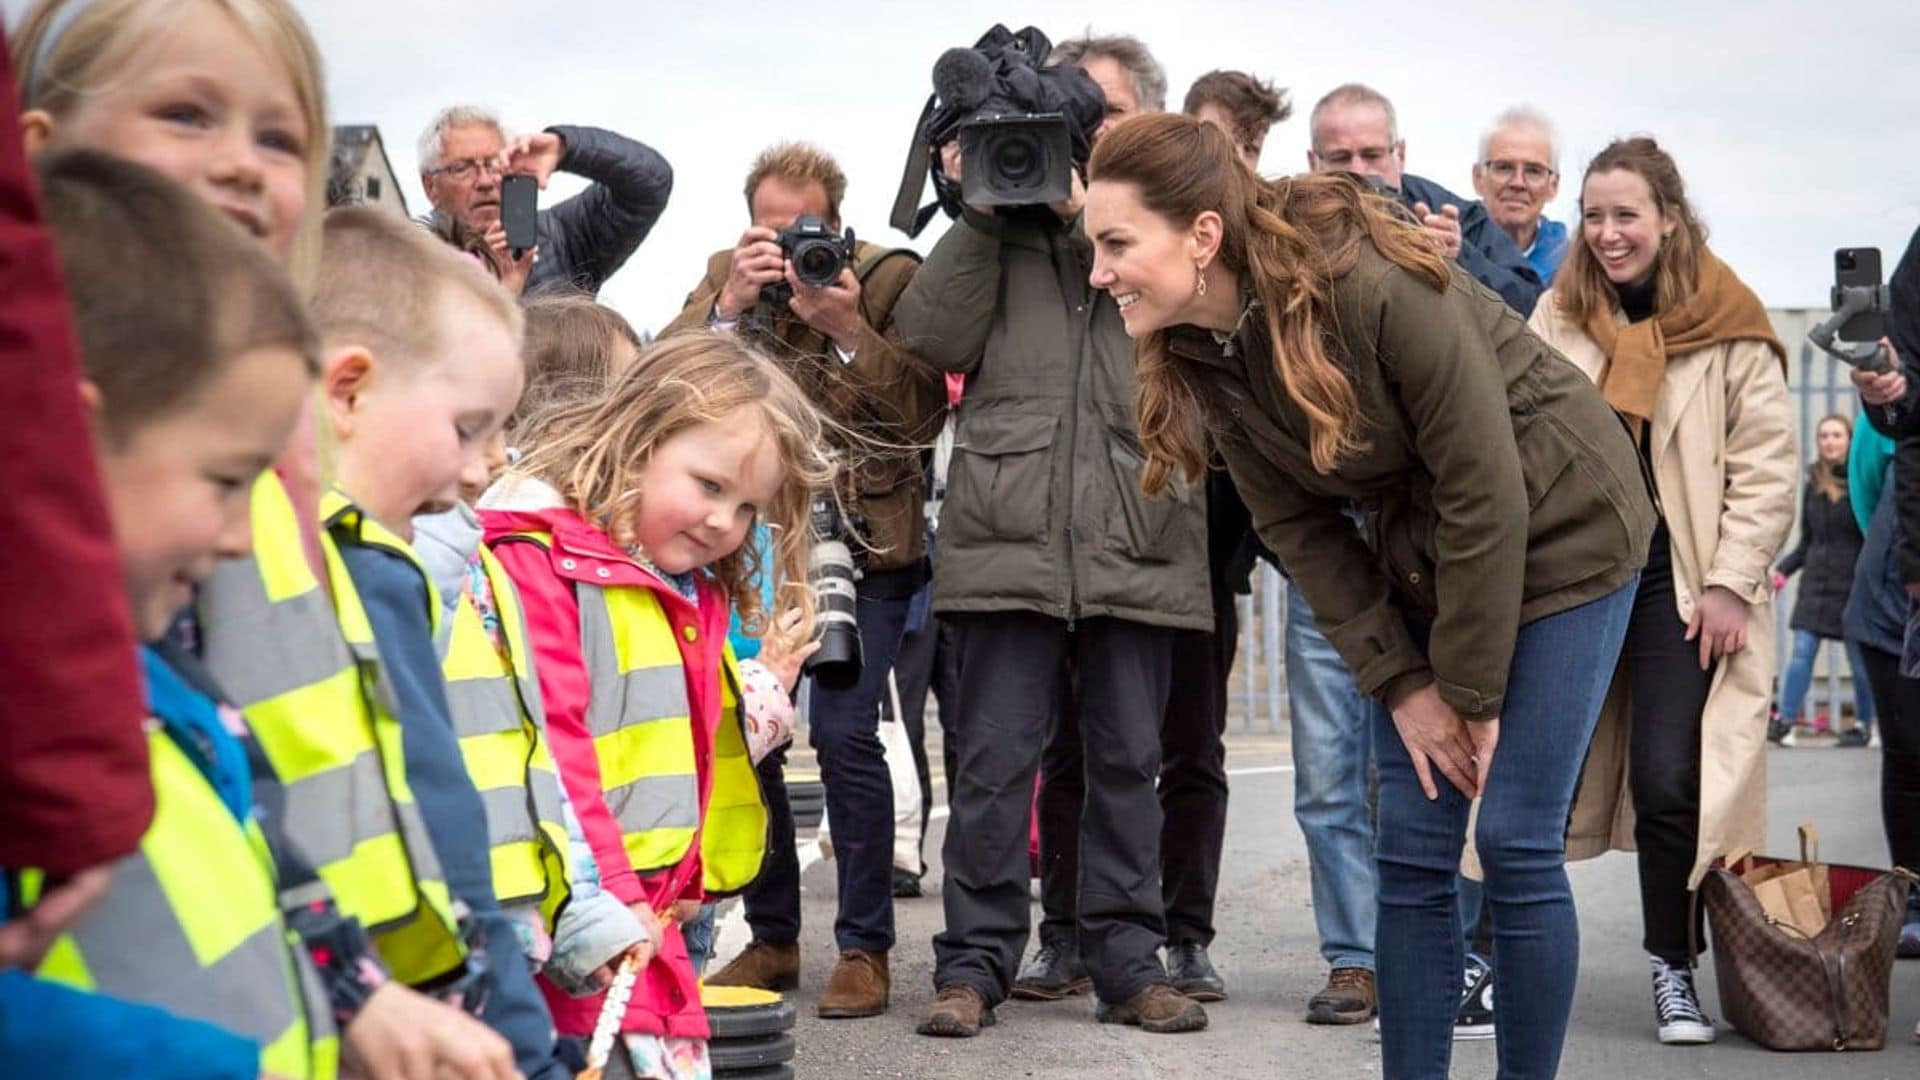 Kate Middleton was asked if she's the Princefind out what she said!